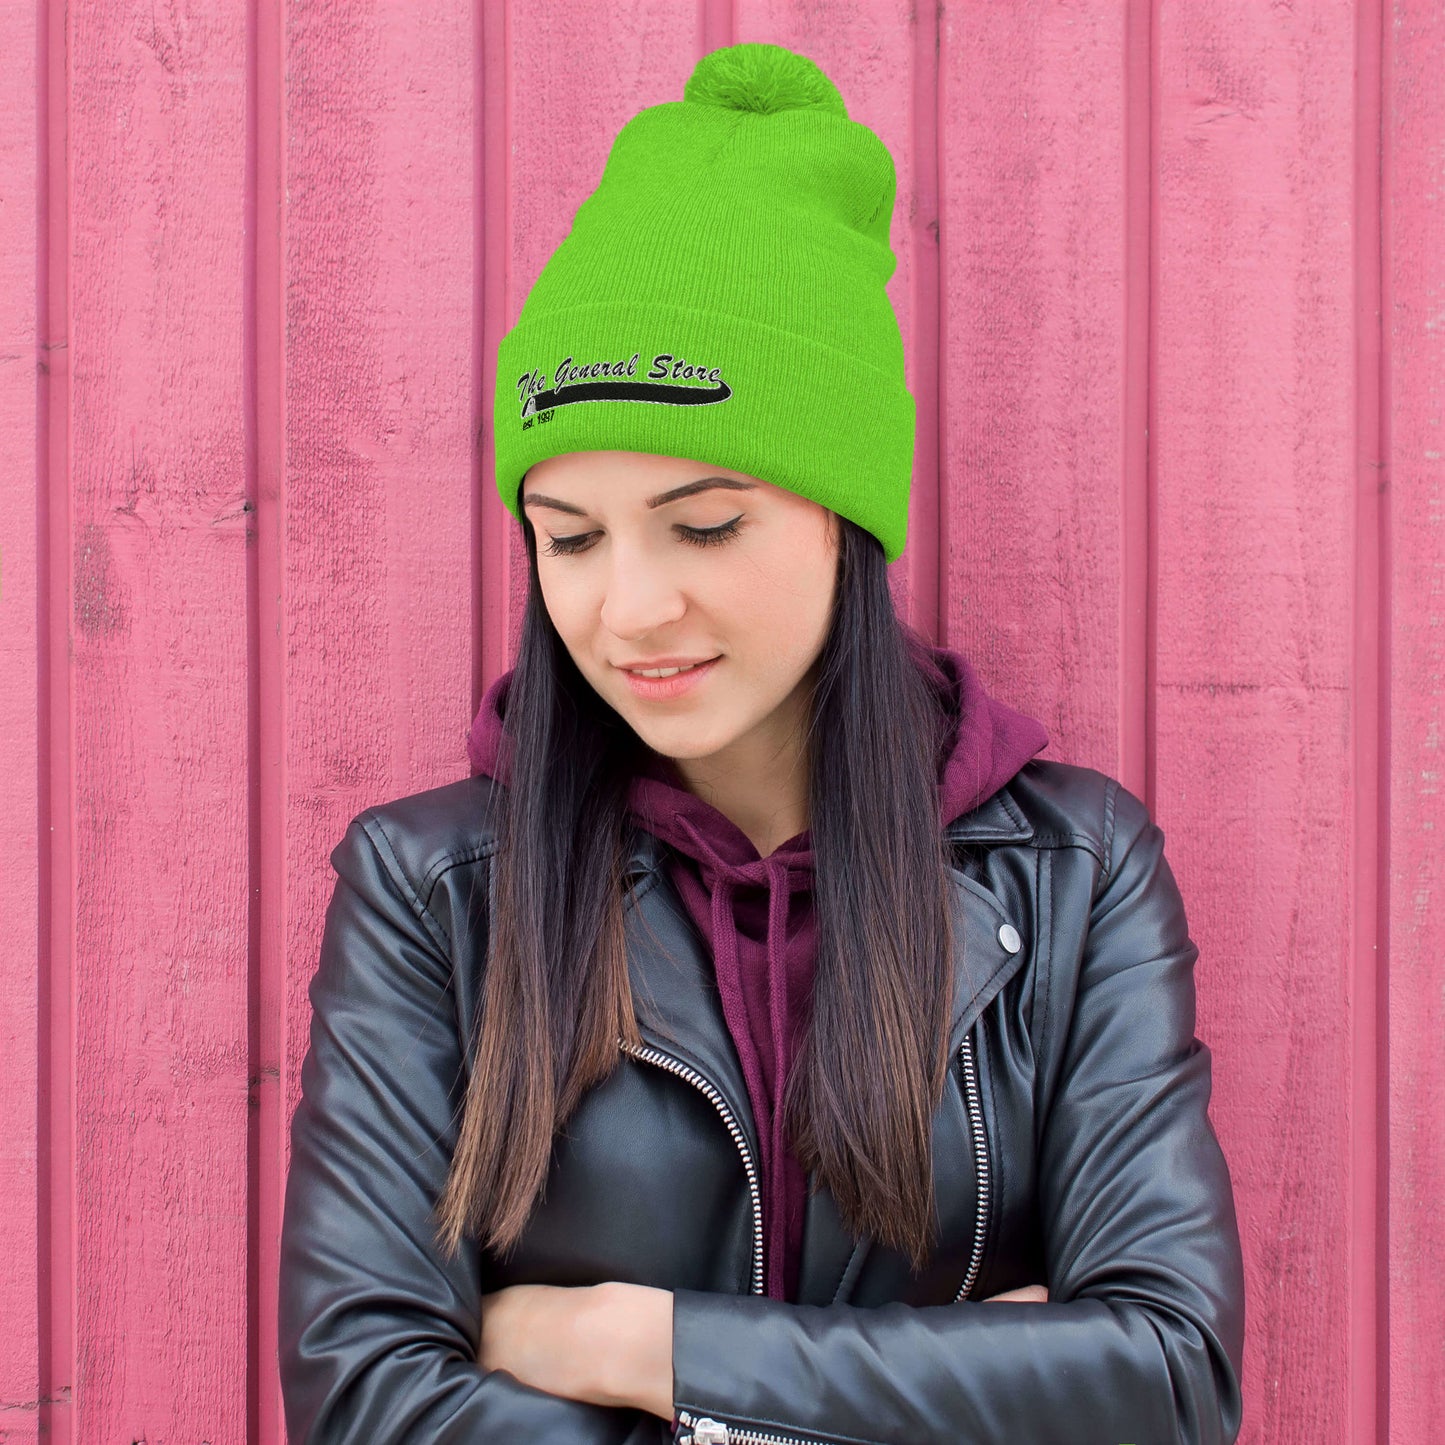 The General Store Embroidered Pom-Pom Beanie